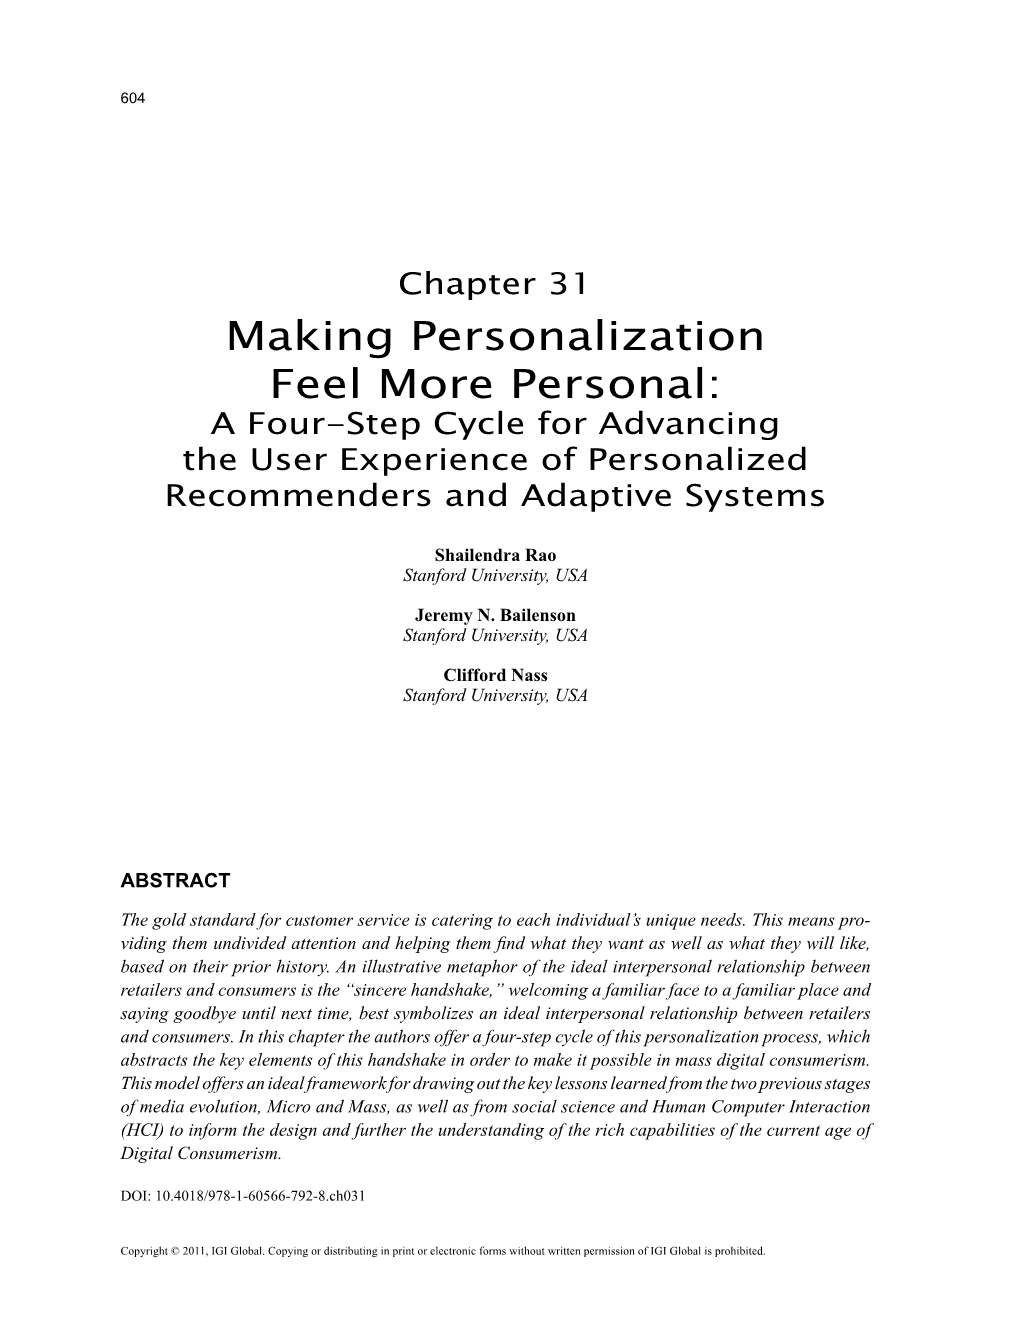 Making Personalization Feel More Personal: a Four-Step Cycle for Advancing the User Experience of Personalized Recommenders and Adaptive Systems